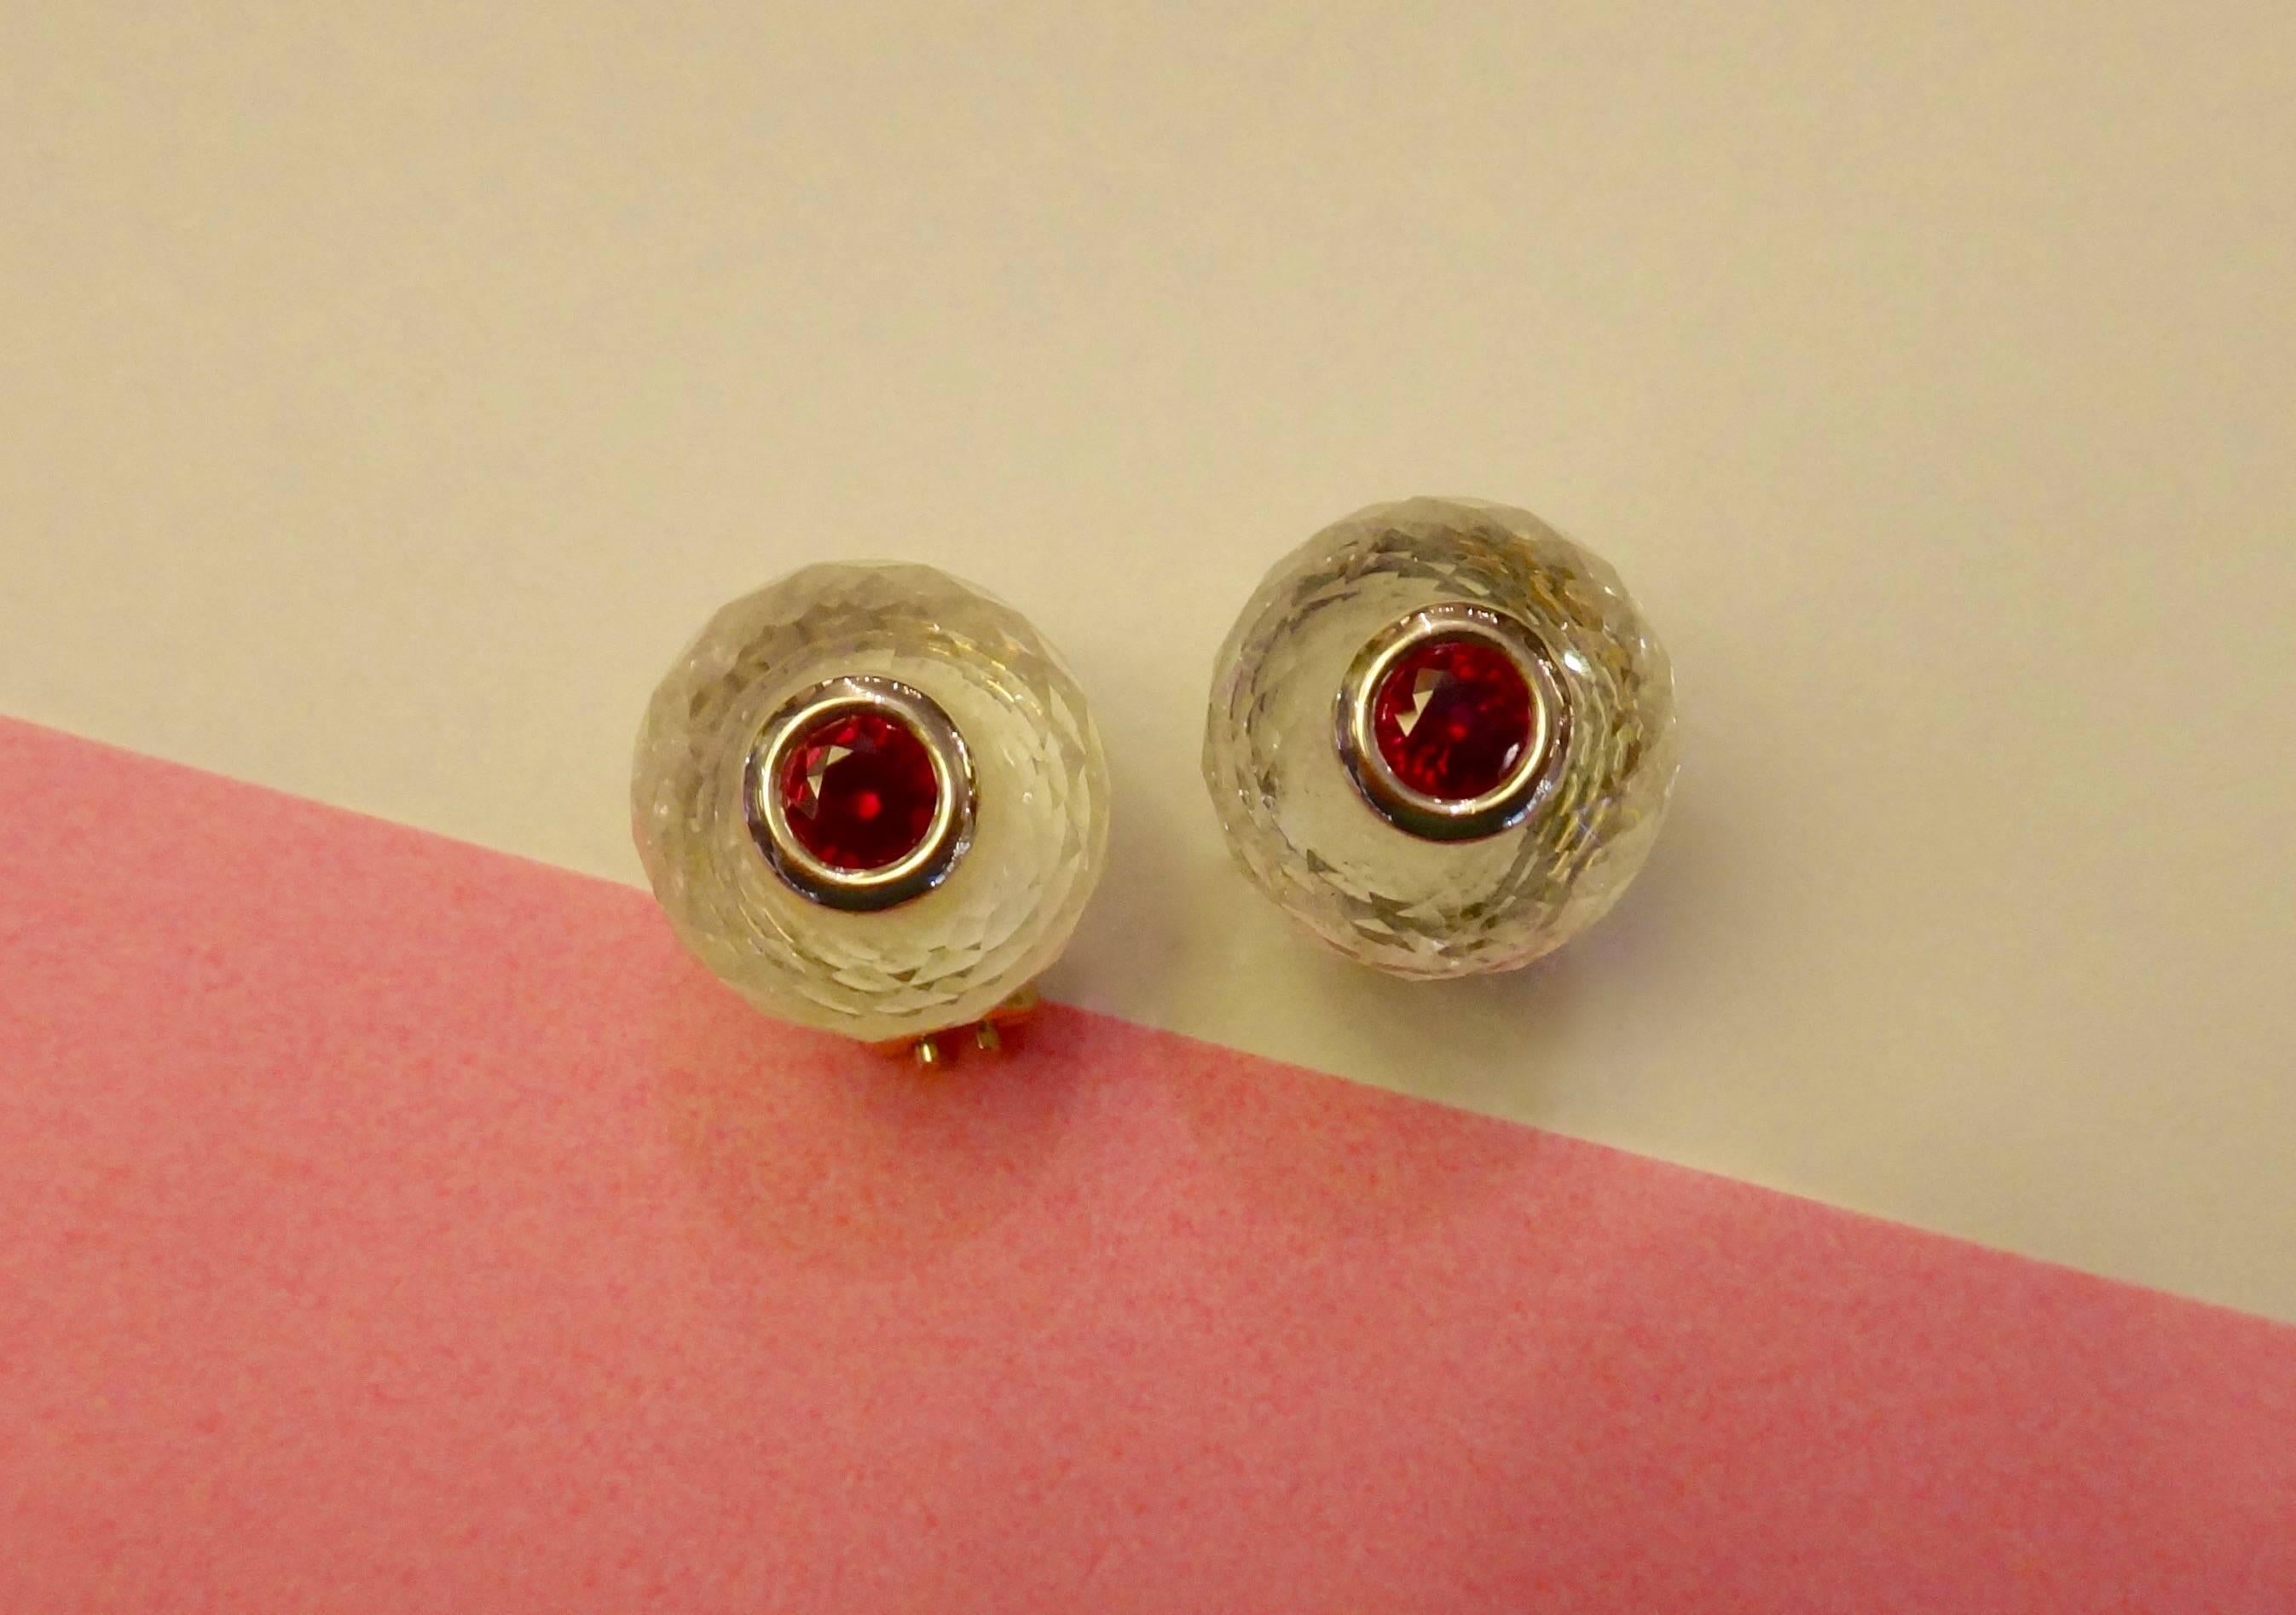 Rondelles of faceted rock crystal are decorated with bezel set, brilliant cut rubies in these stunning stud earrings.  18k yellow gold posts with omega clip backs.  